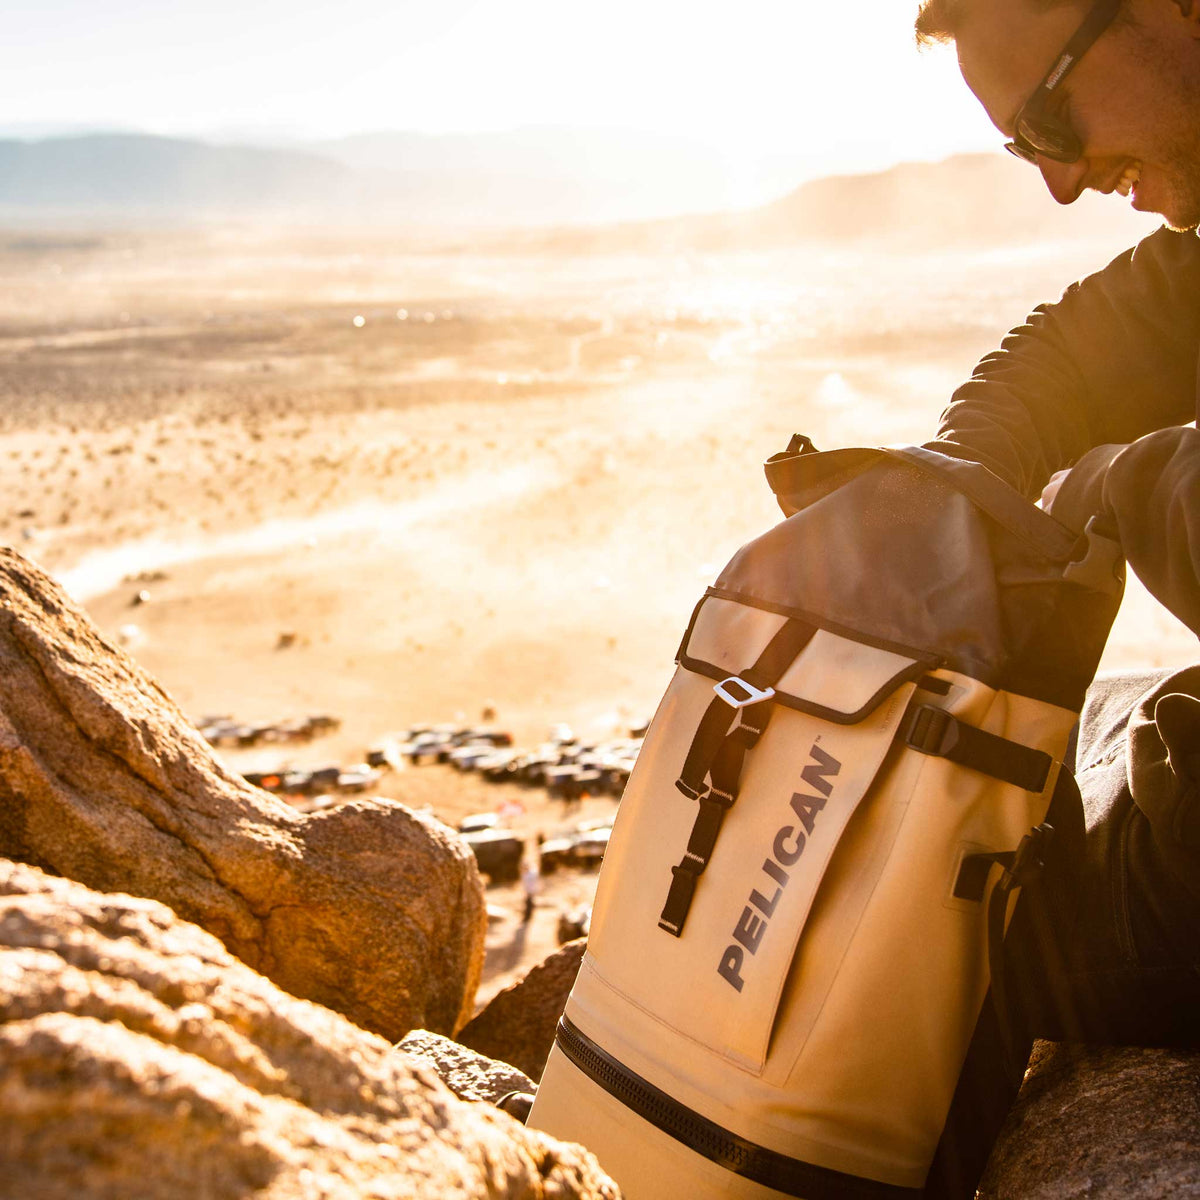 SOFT-CBKPK-COYOTE Pelican™ Dayventure Backpack Soft Cooler being used in the desert